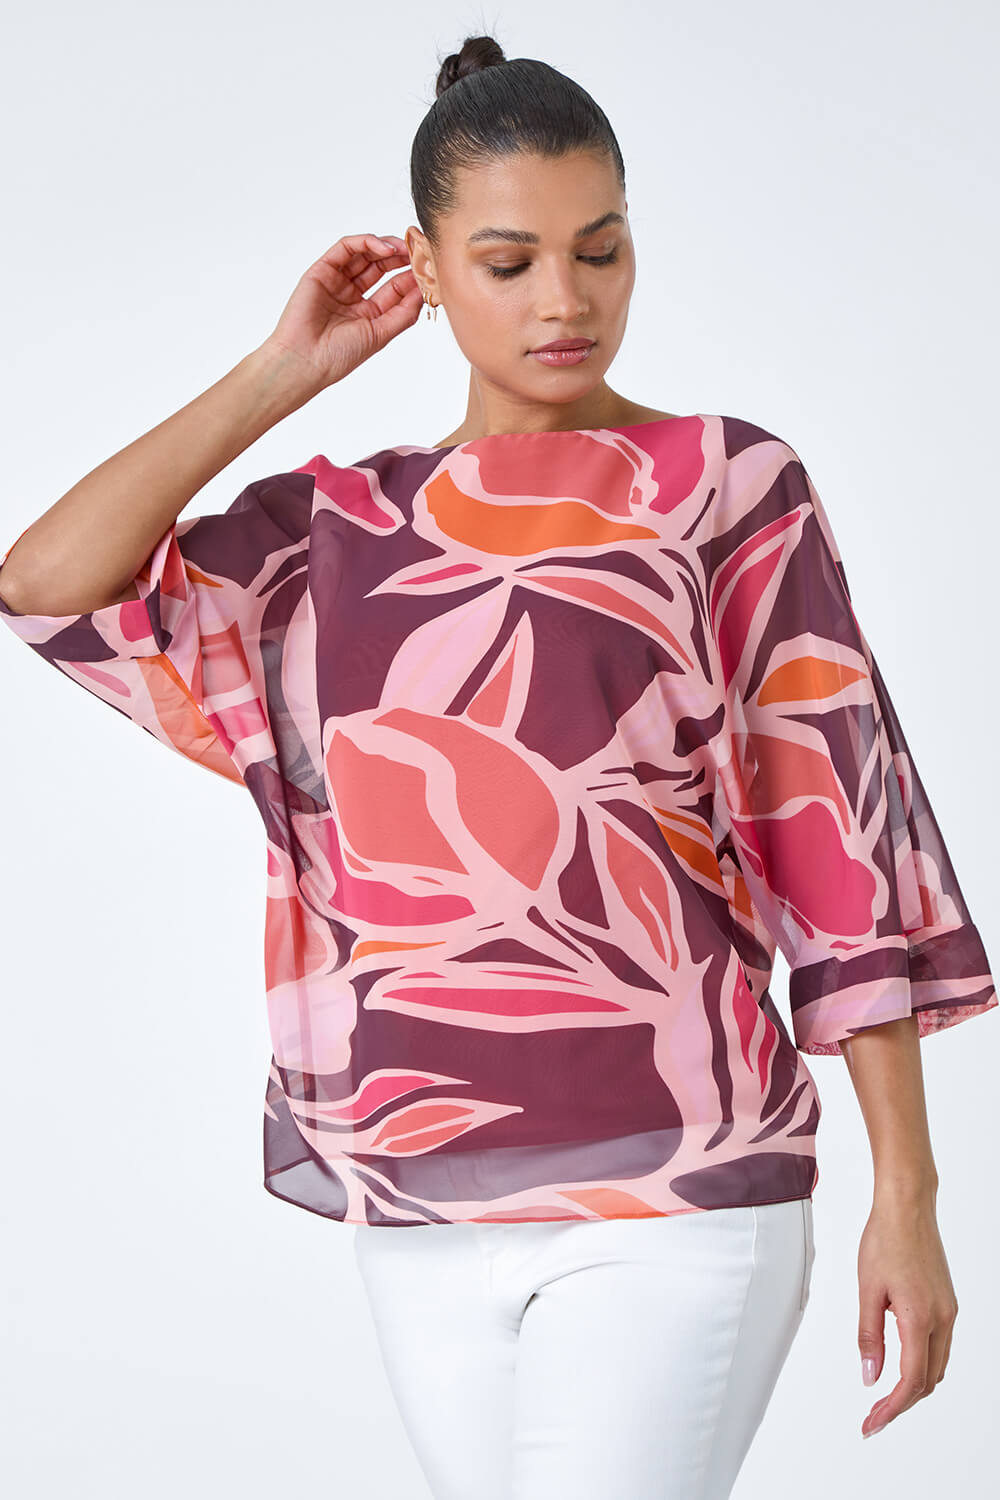 CORAL Floral Print Overlay Top, Image 2 of 5